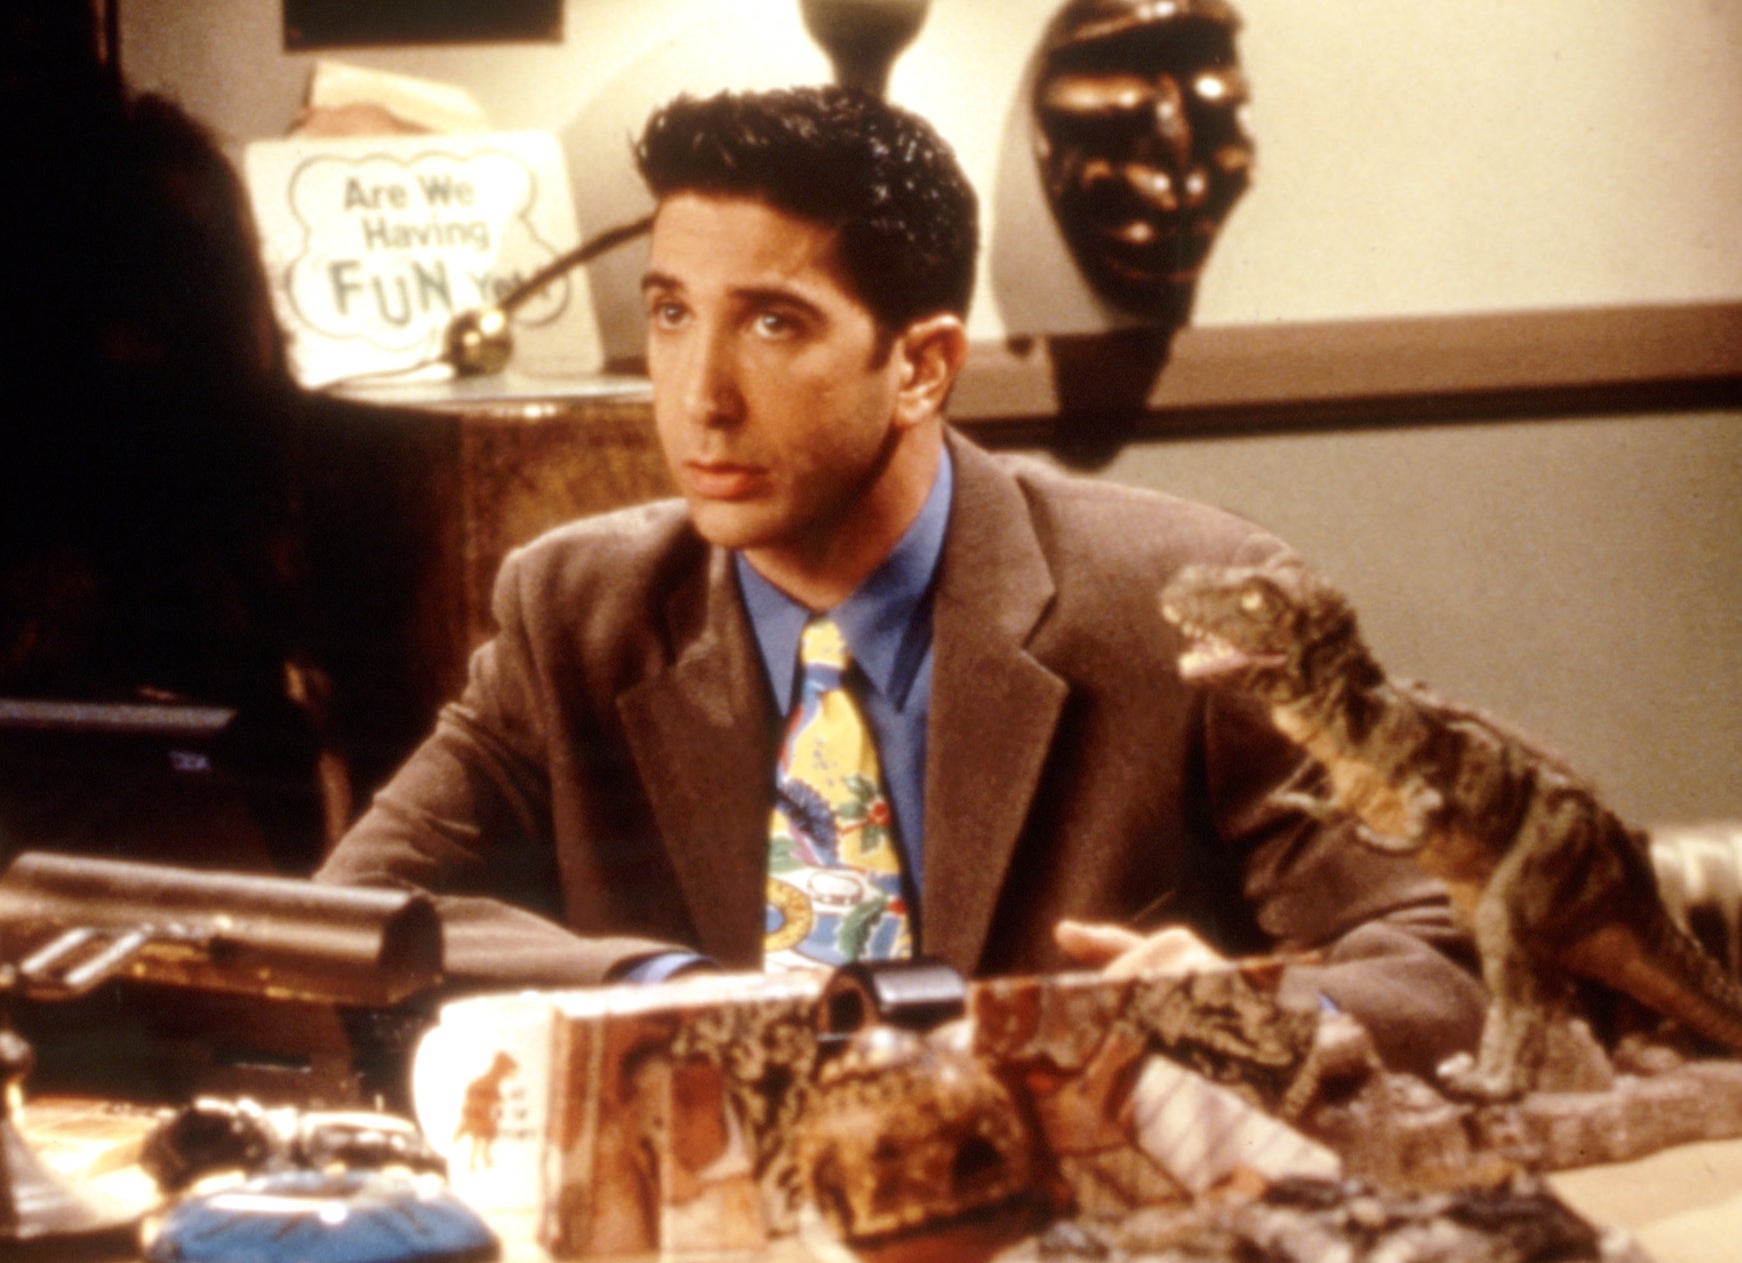 Ross from Friends sits at a desk surrounded by dinosaur artifacts, wearing a jacket and tie with a dinosaur-themed shirt